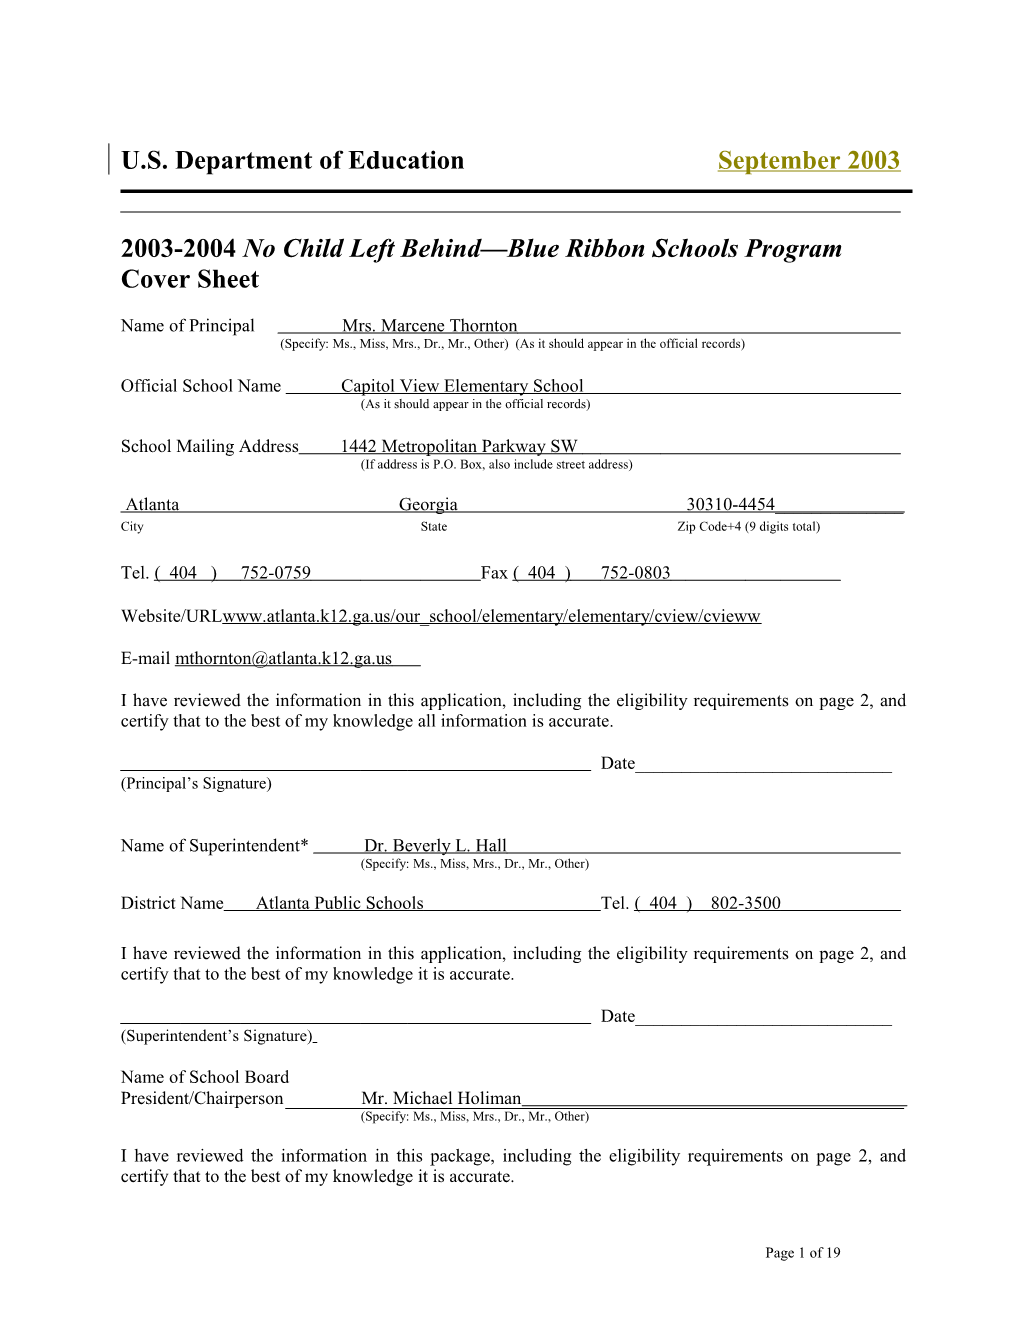 Capitol View Elementary School 2004 No Child Left Behind-Blue Ribbon School Application (Msword)